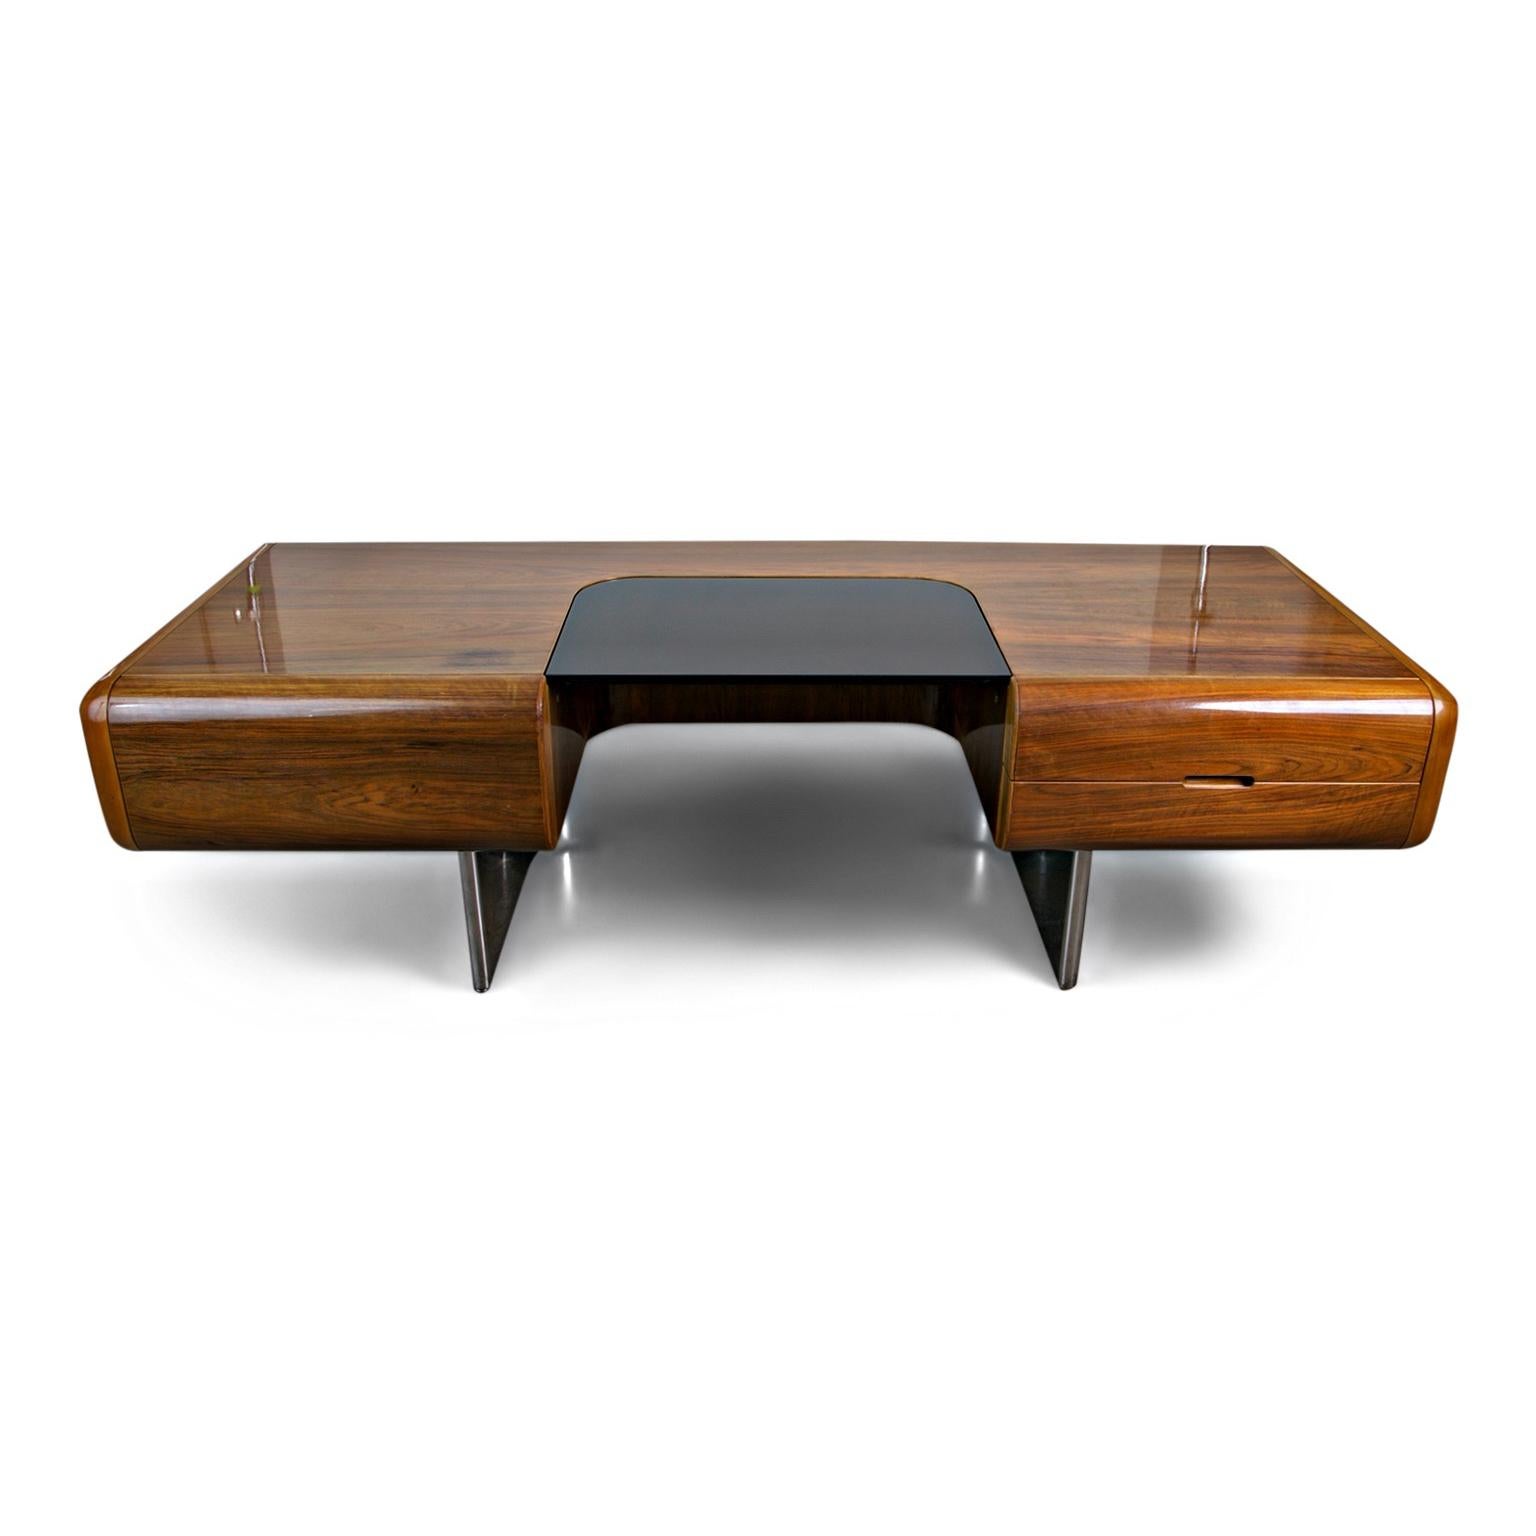 An incredibly rare, special and massive Executive Desk designed by M. F. Harty and produced by Stow Davis as part of the 